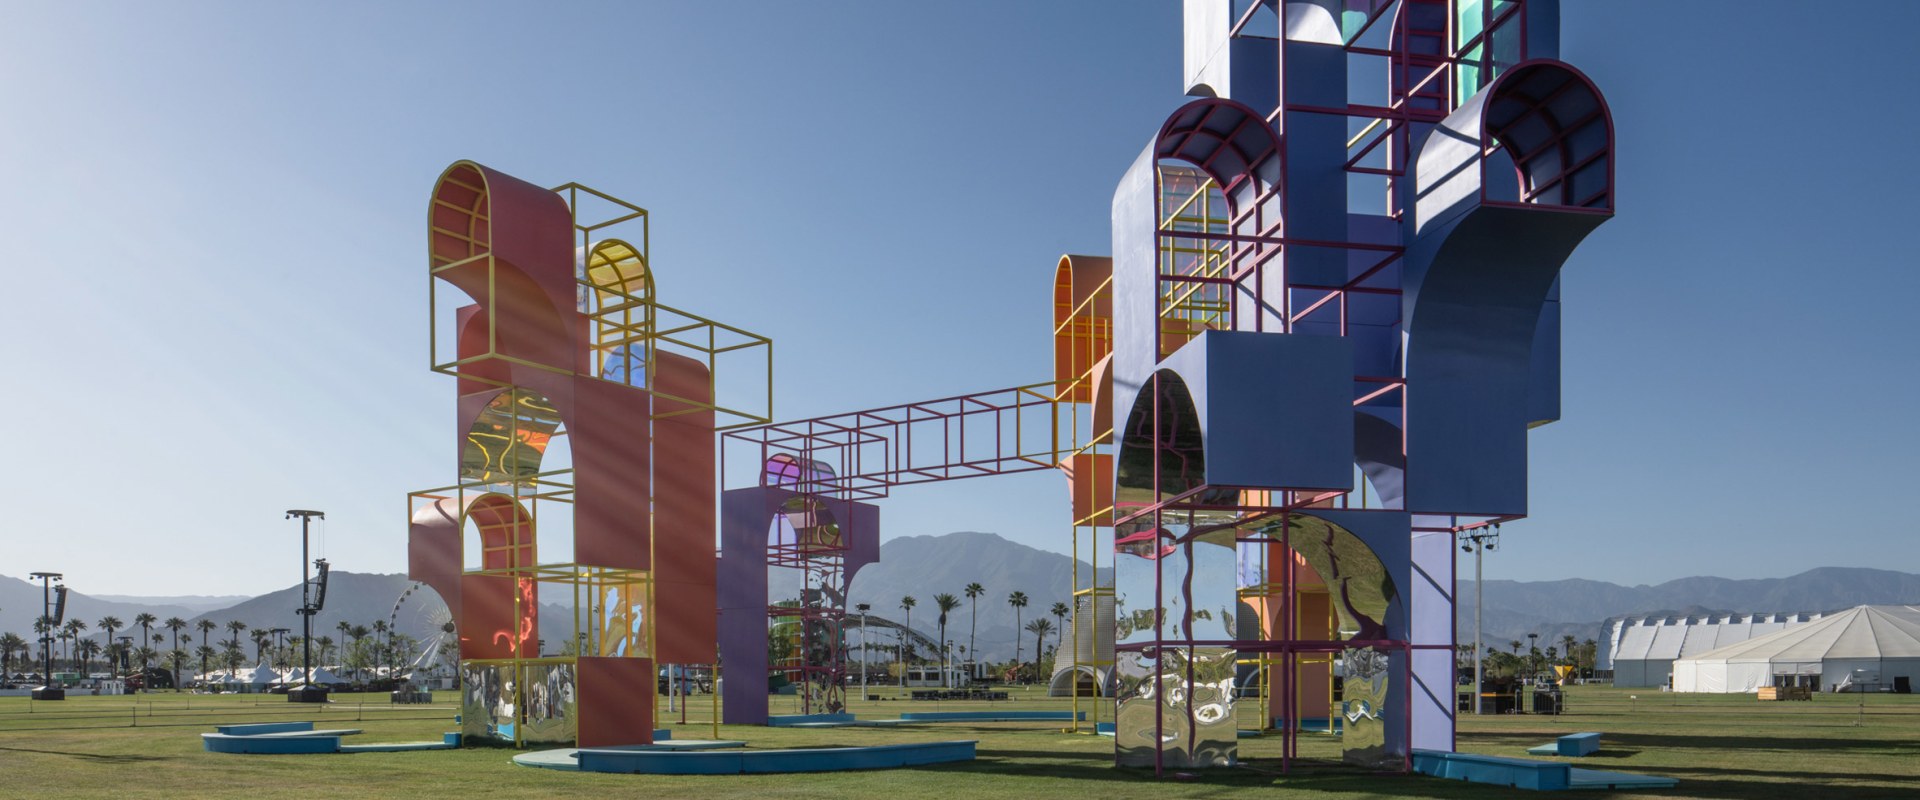 Exploring the Great Outdoors: A Look at Coachella Valley Wellness Recreation